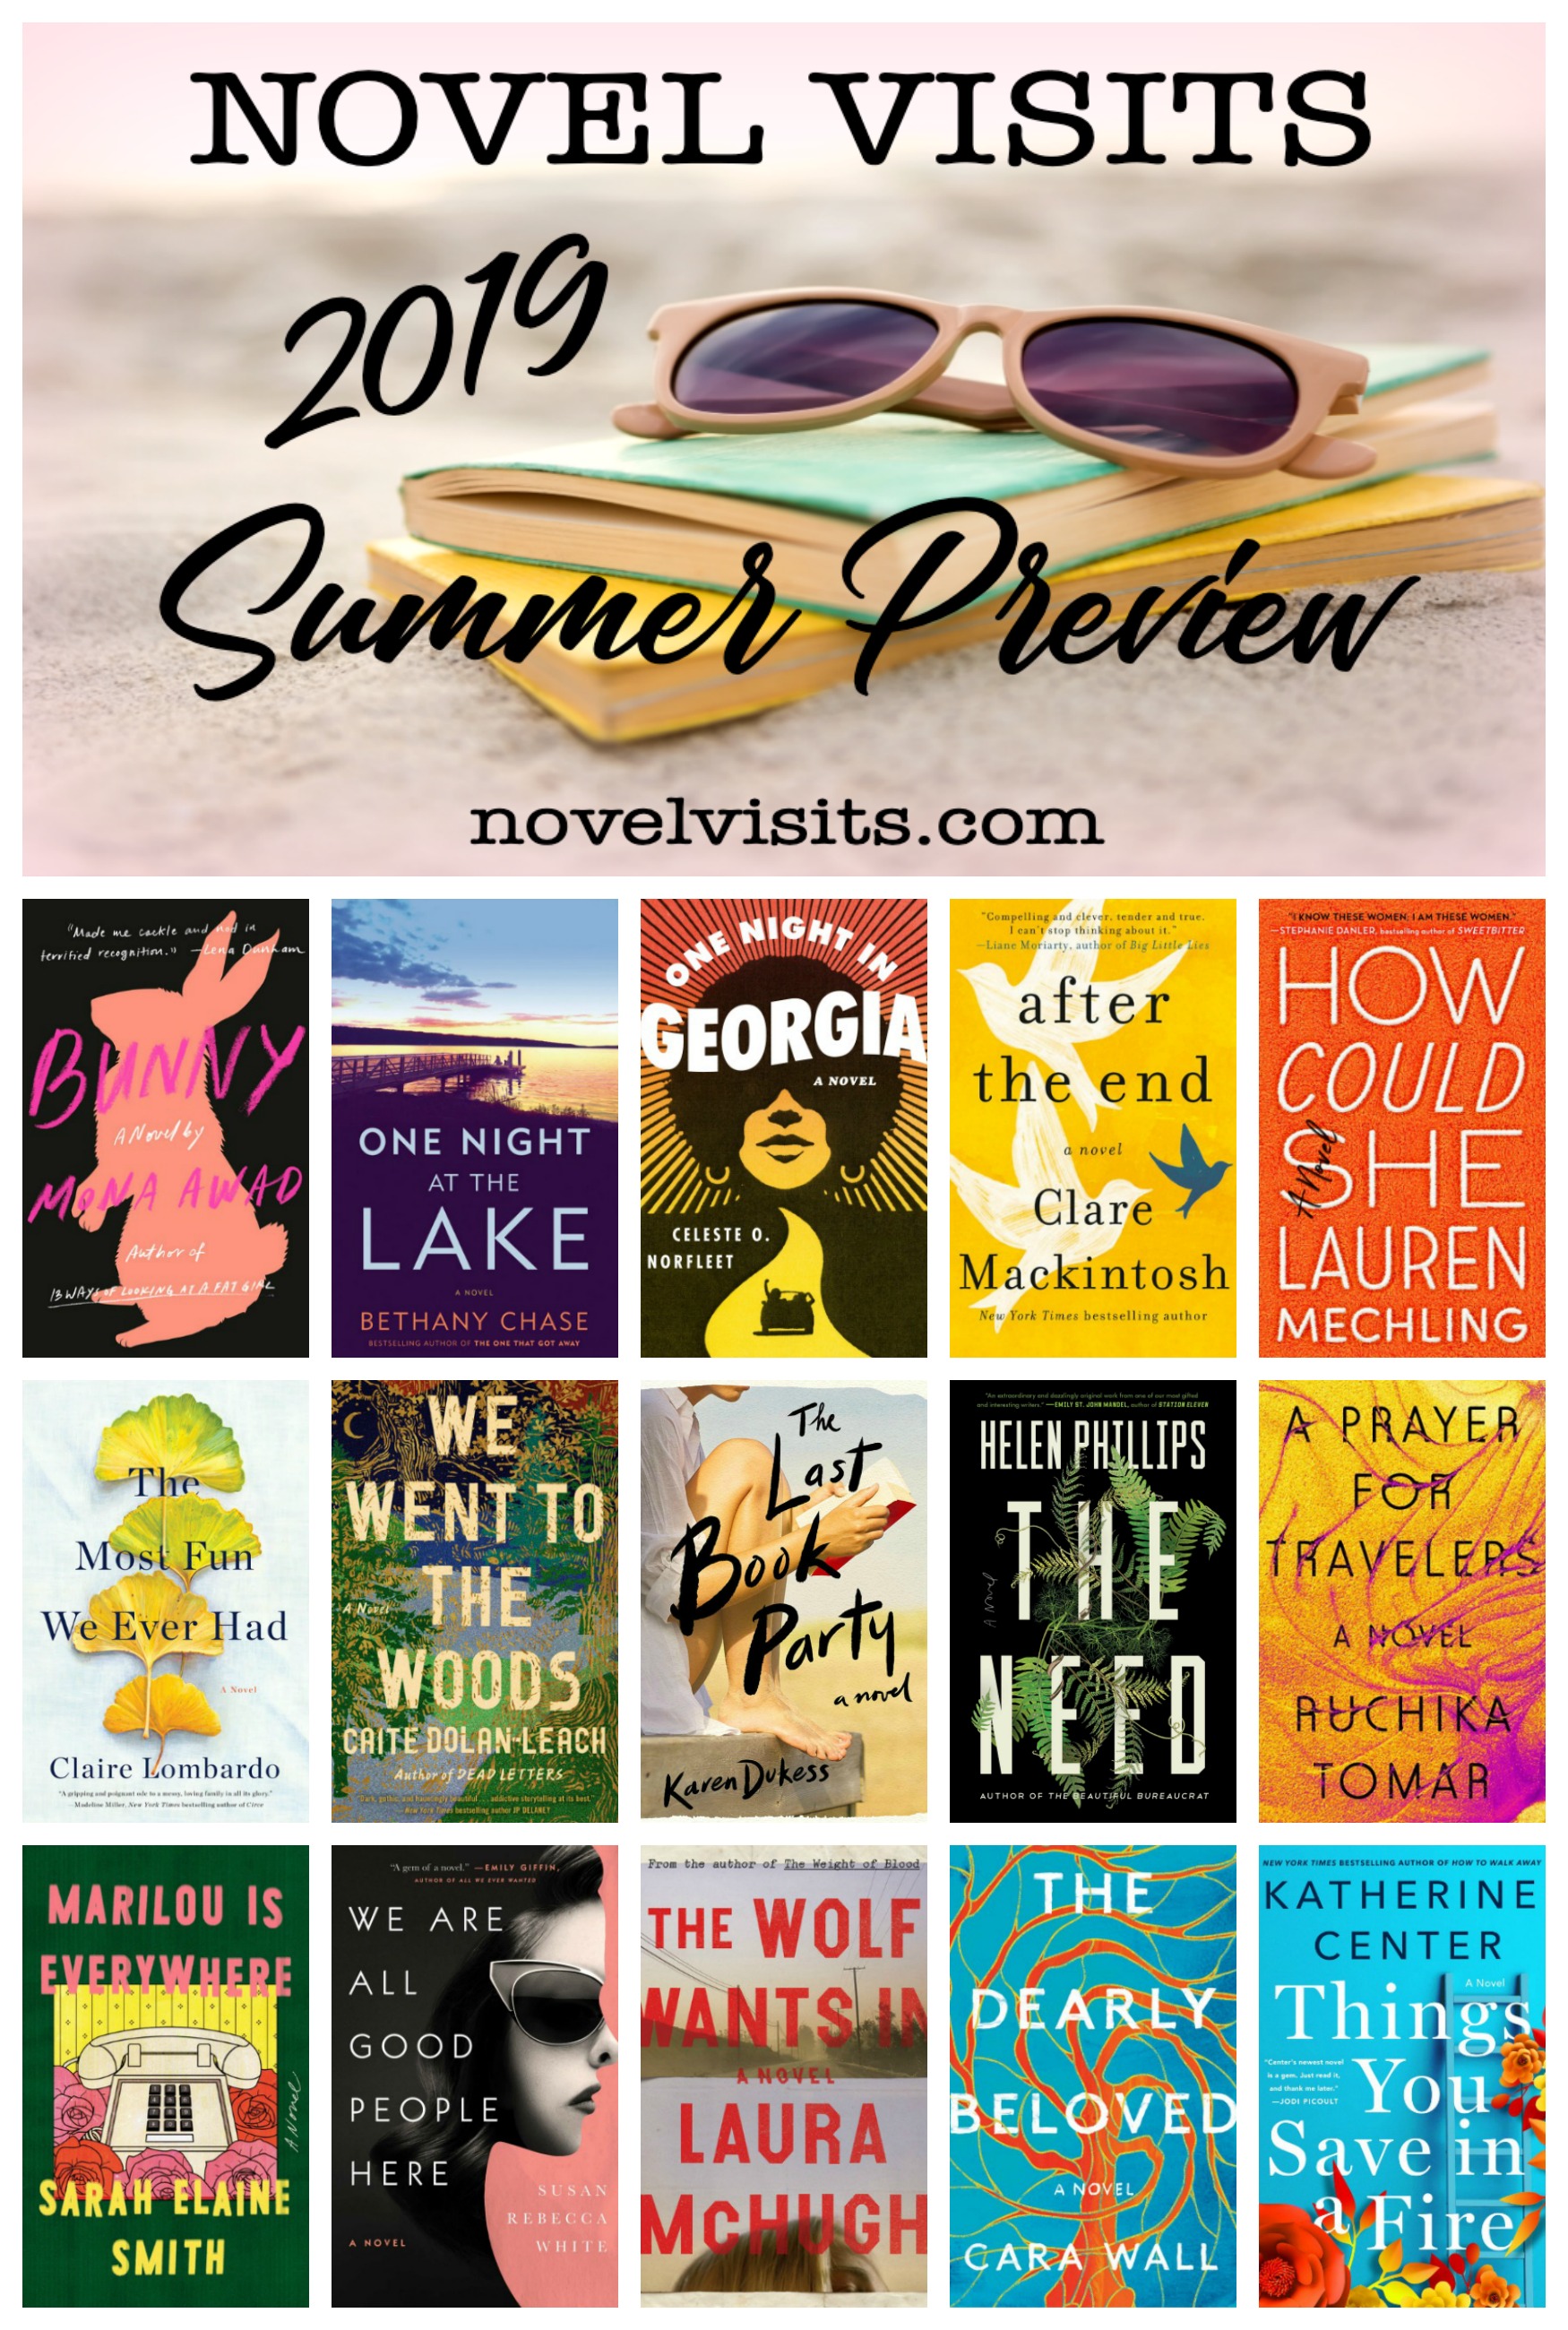 Novel Visits 2019 Summer Preview - A glimpse of the summer releases I'm most looking forward to this year.